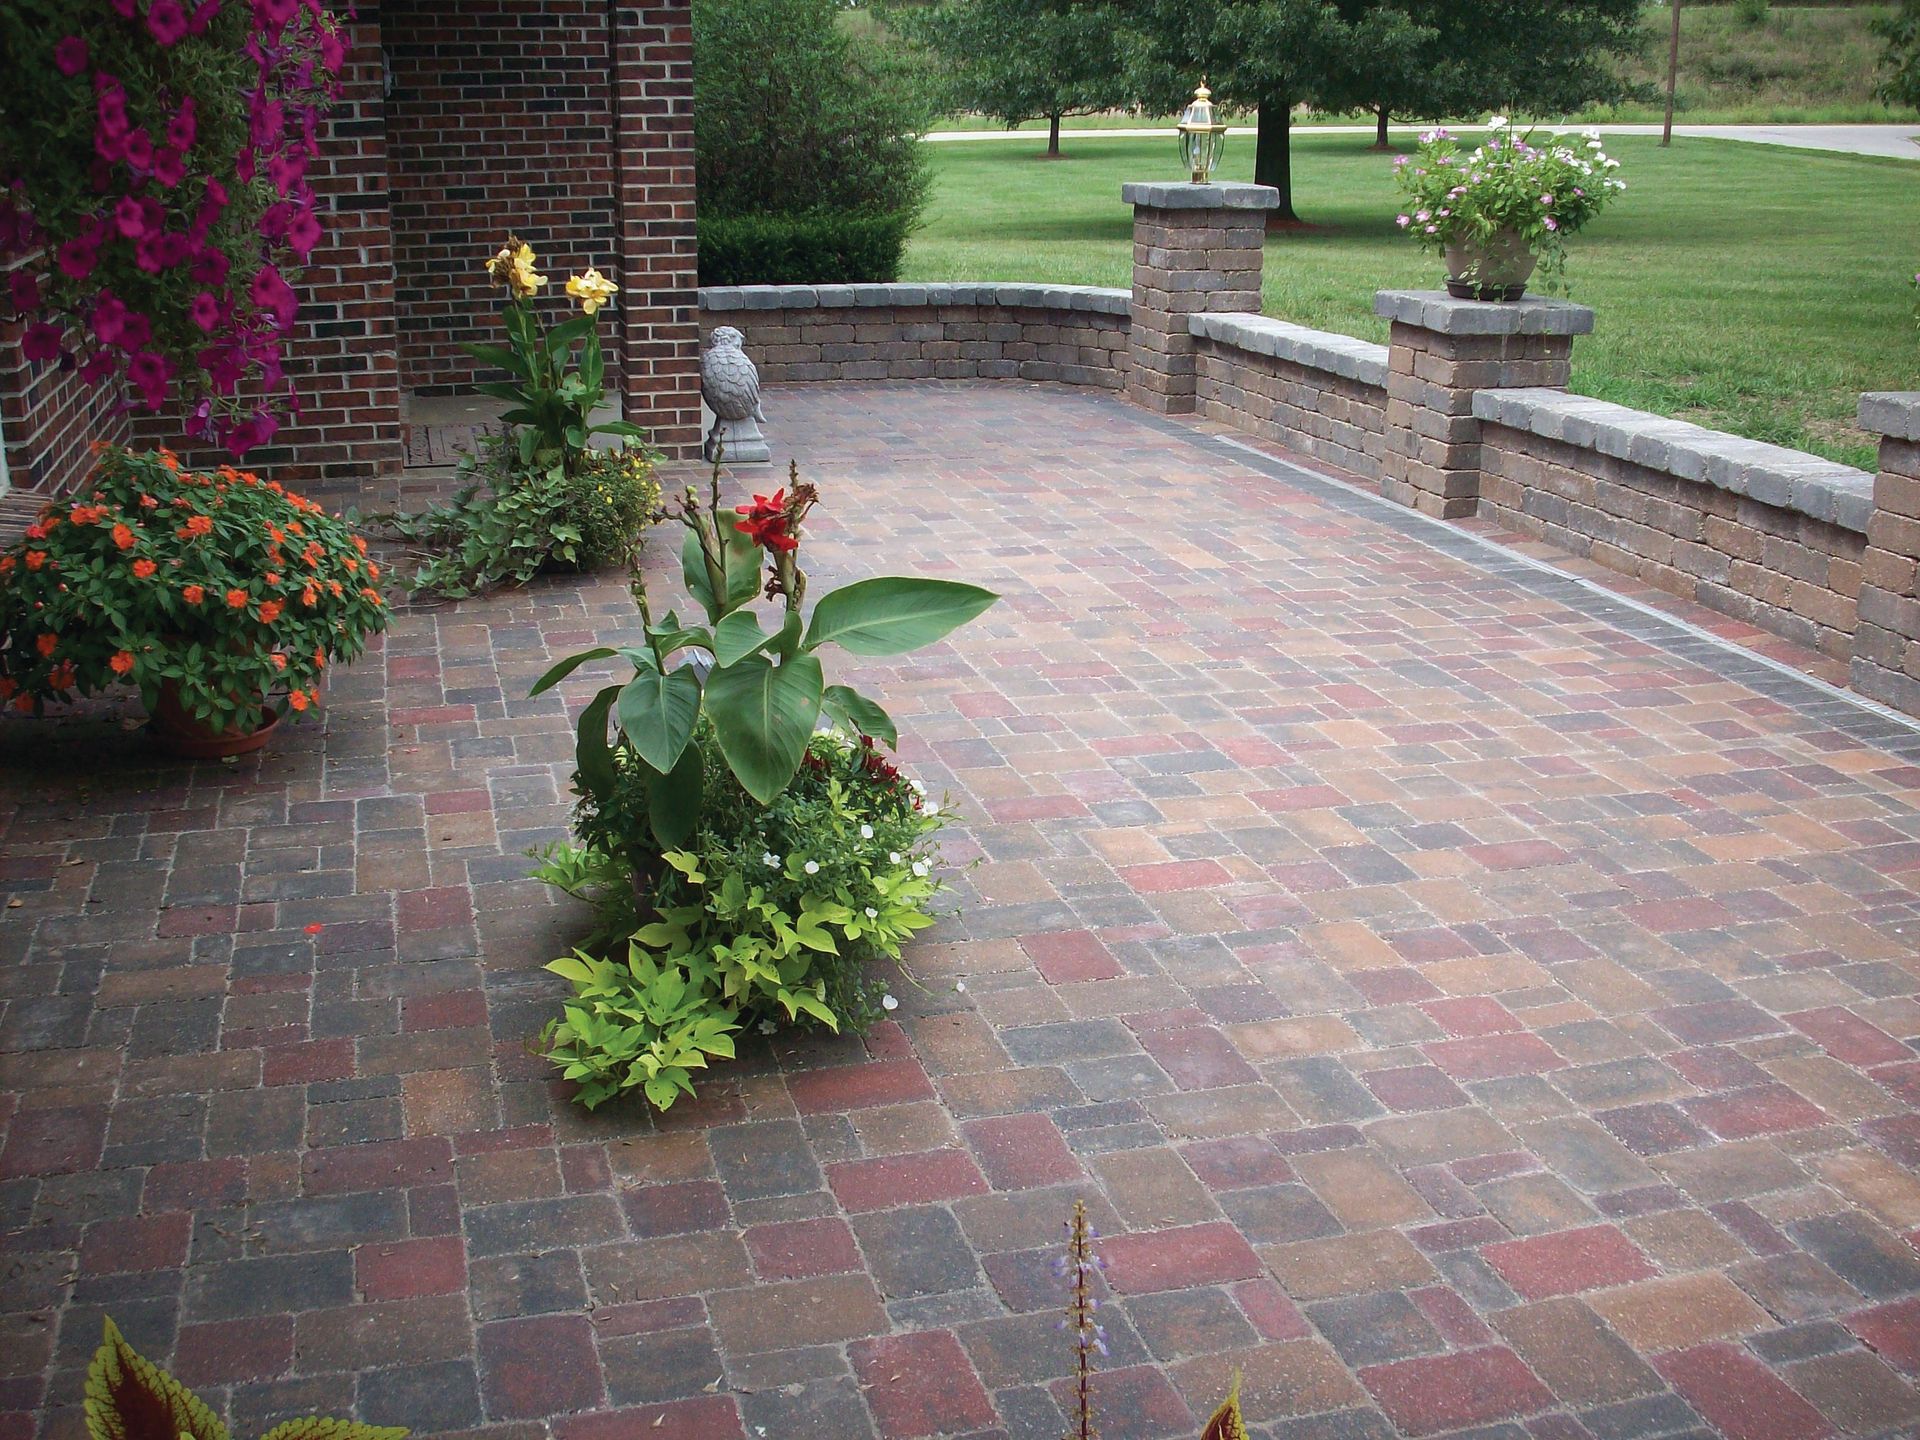 Stockman Stoneworks’ Aged Cordobay Pavers Are Your Key to Crafting a Rustic Outdoor Patio.